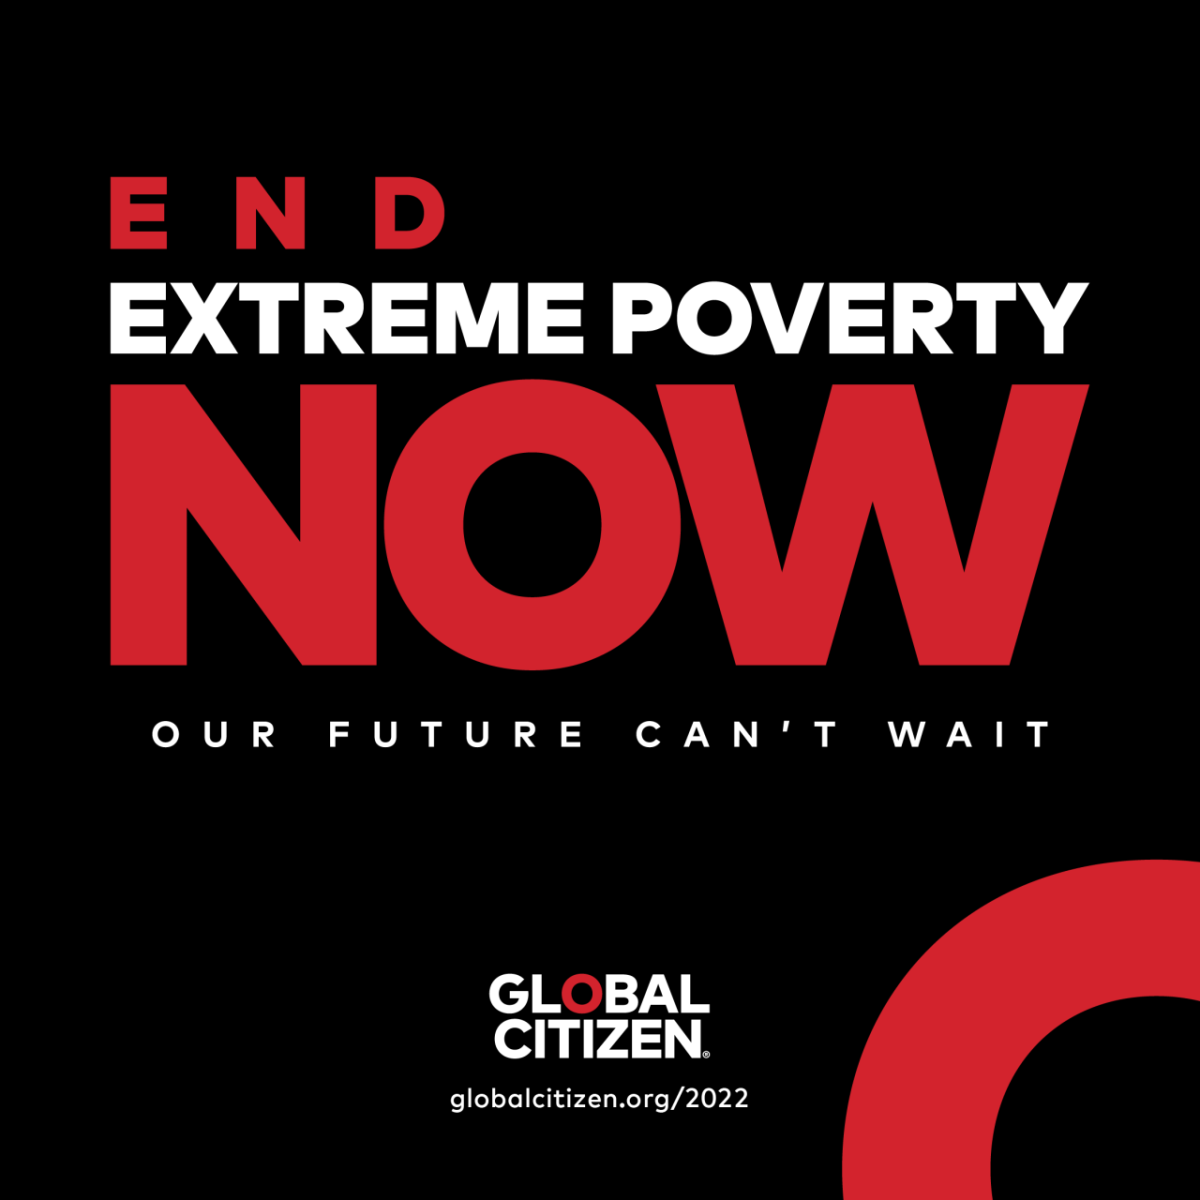 "END ETREME POVERTY NOW, OUR FUTURE CAN'T WAIT" with Global Citizen logo and globalcitzen.org/2022